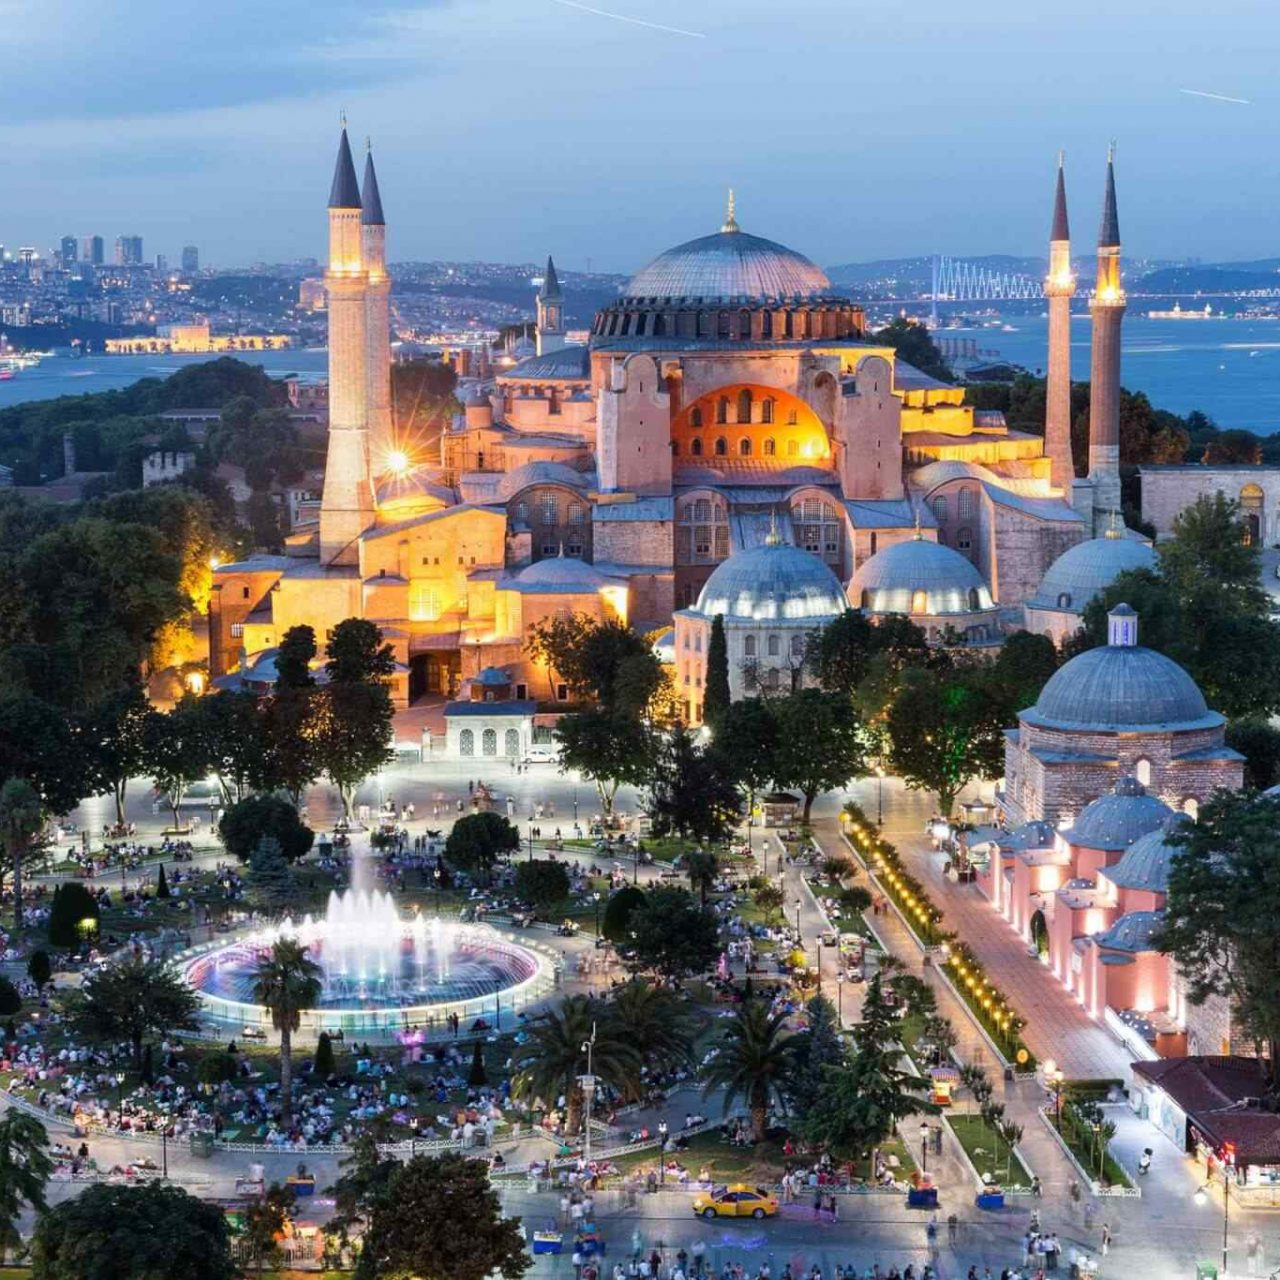 http://spicyvacations.com/wp-content/uploads/2018/09/destination-istanbul-02-1280x1280.jpg